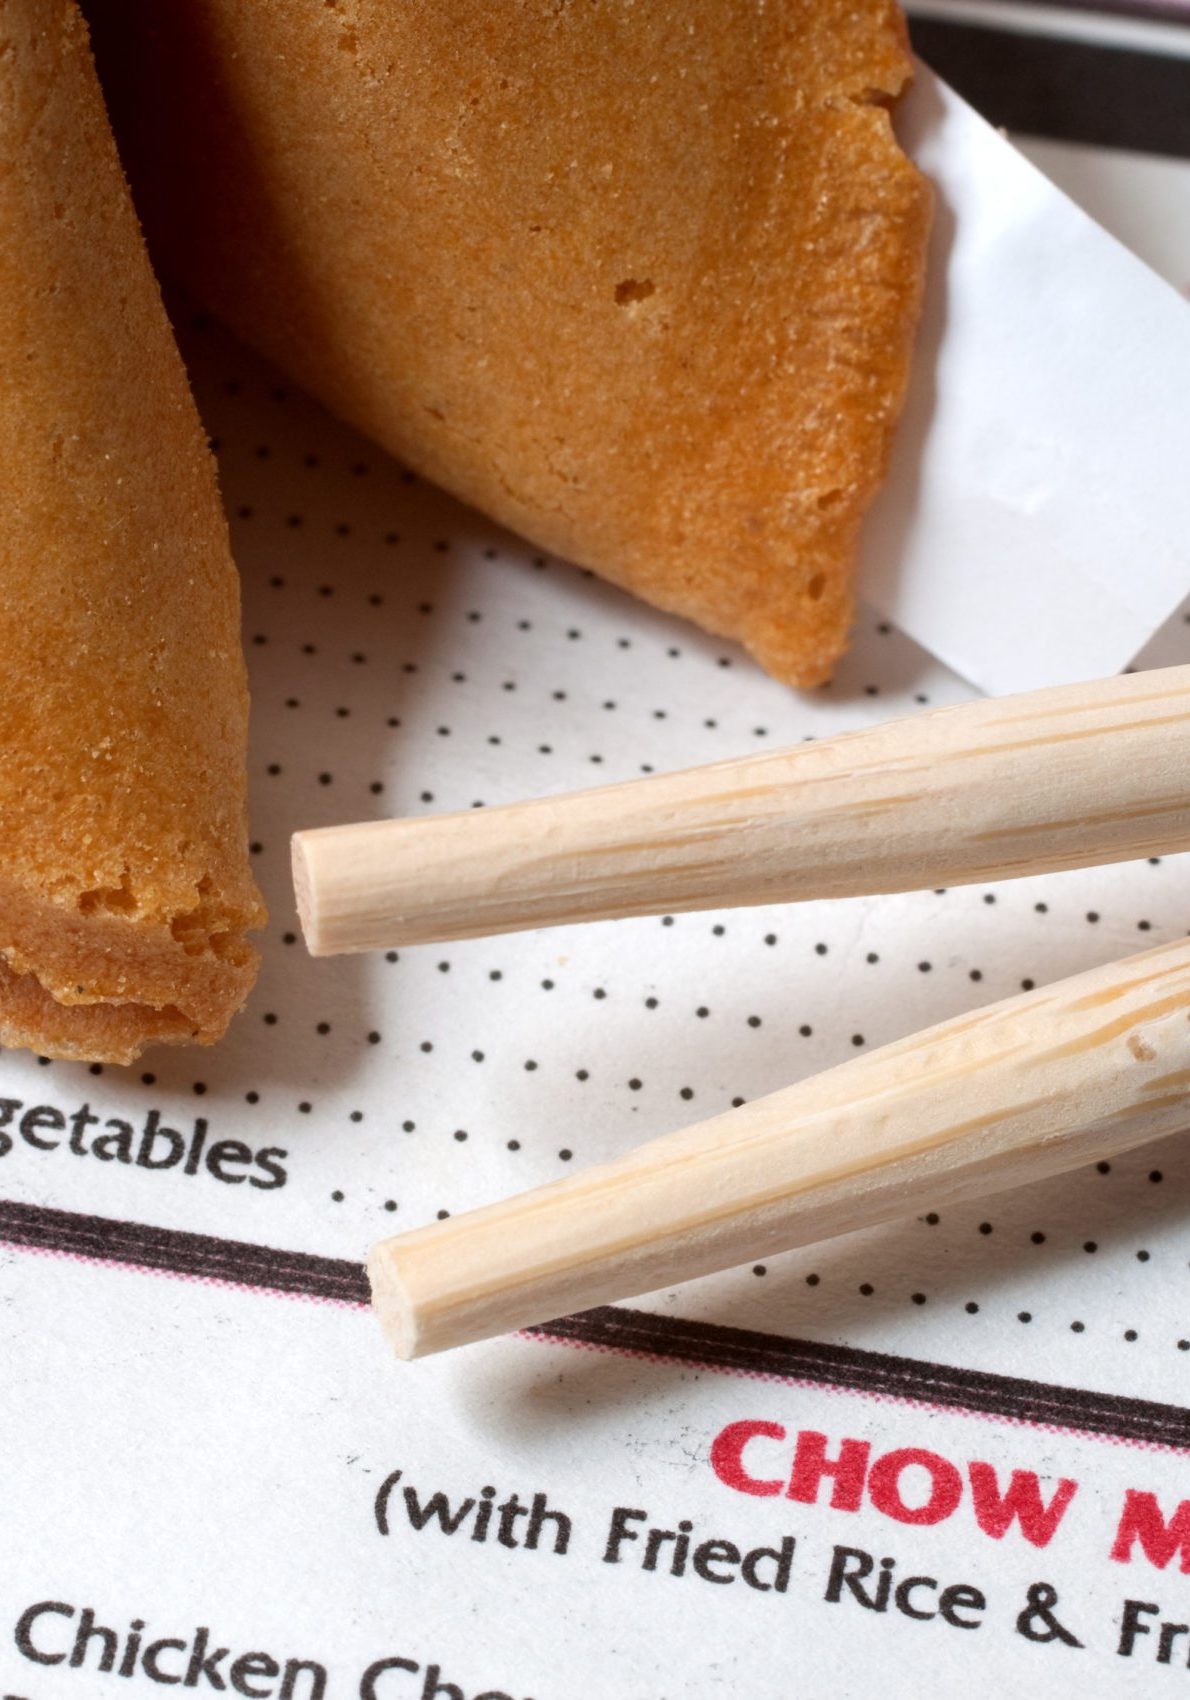 Chinese restaurant menu with chopsticks and fortune cookie.